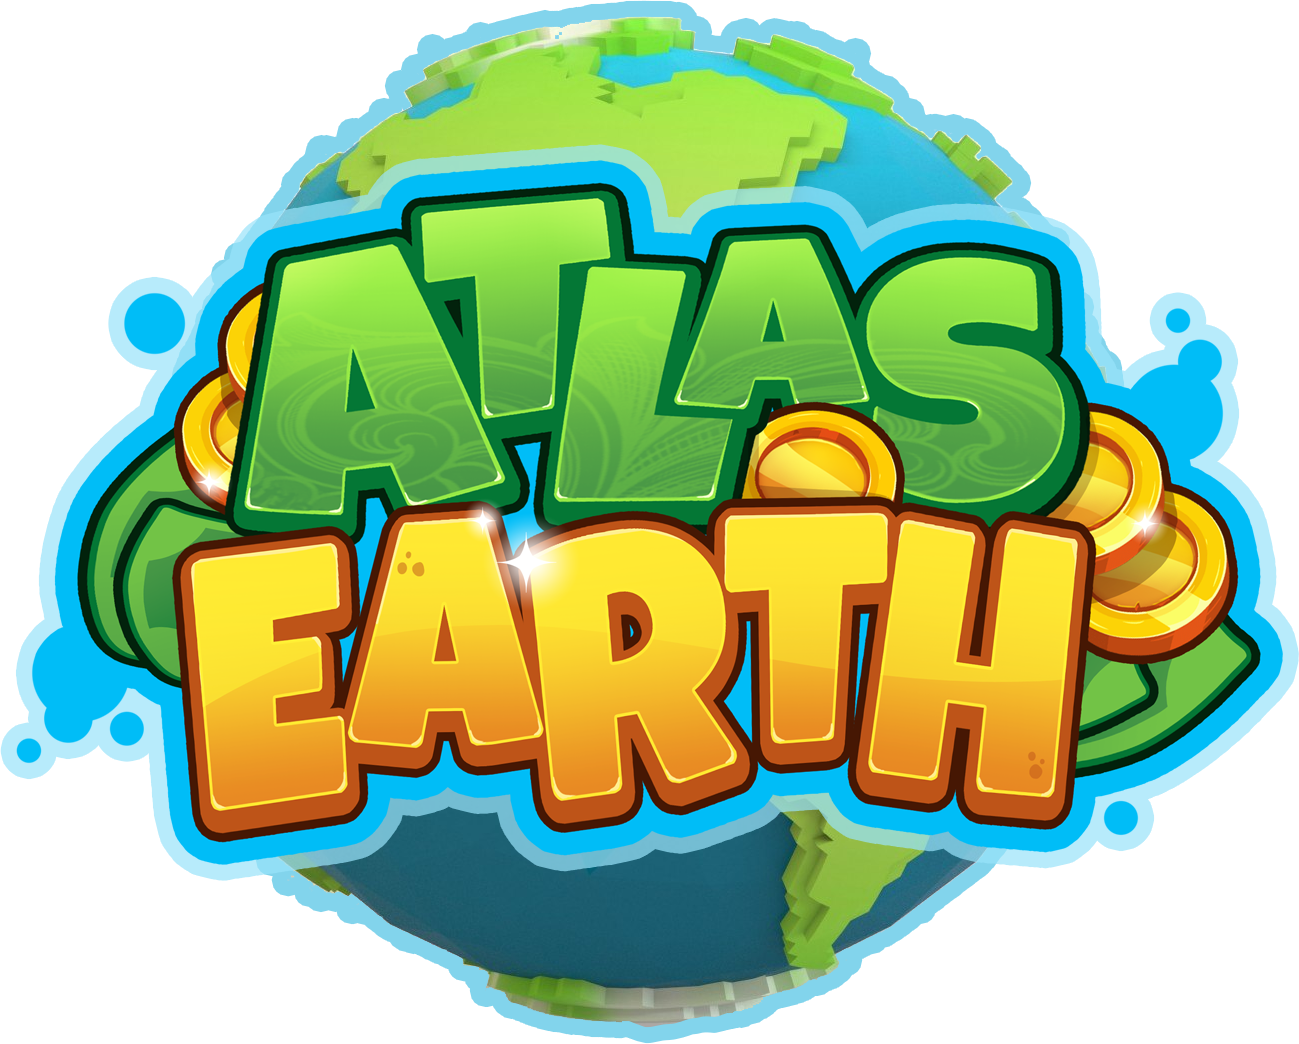 Earn Passive income with Atlas Earth Online